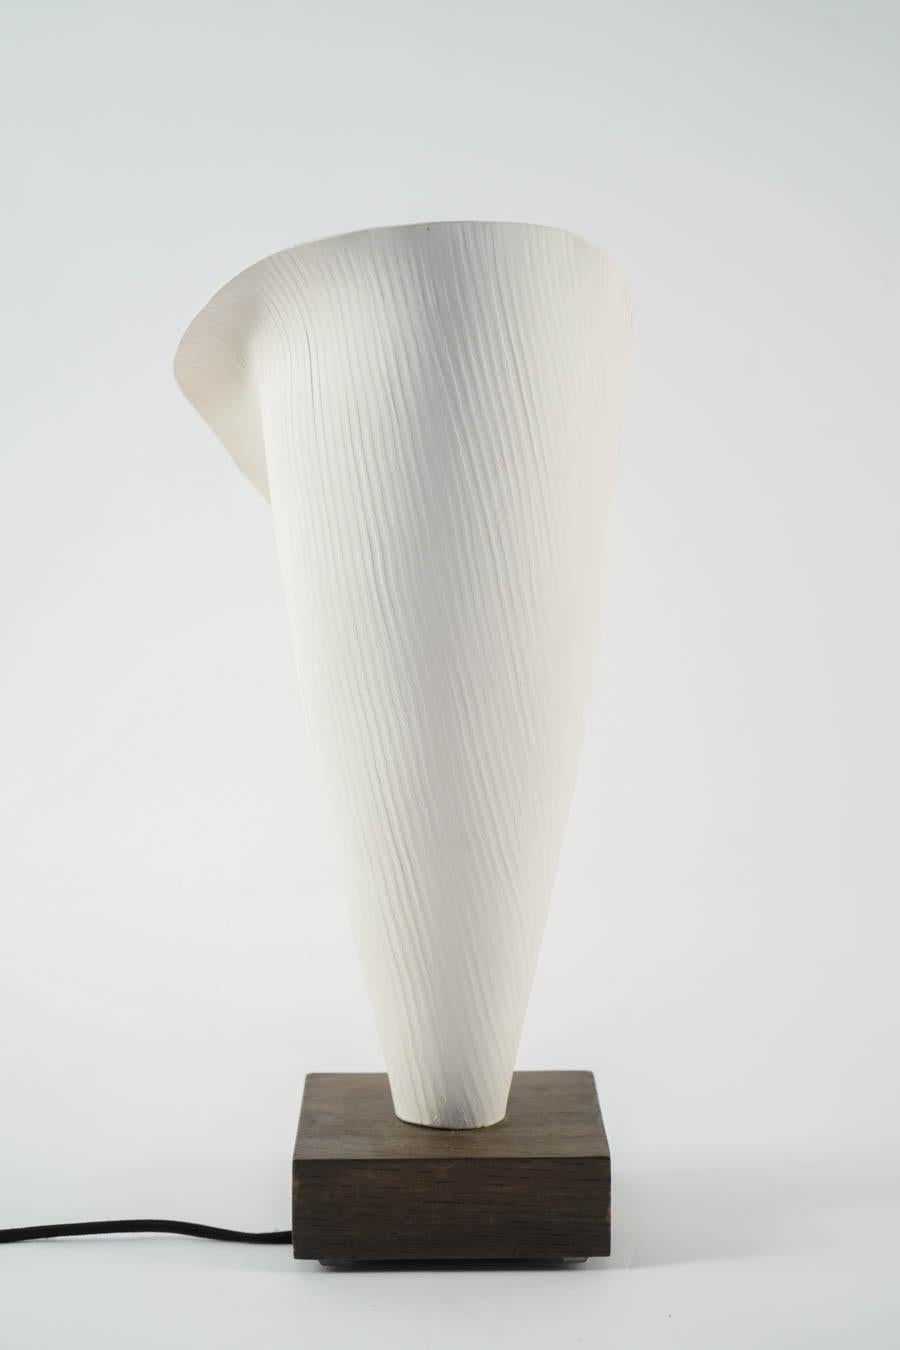 Contemporary Table Lamp, White Ceramic Lamp Made by Hand Mounted on Solid Oak, Art Modern